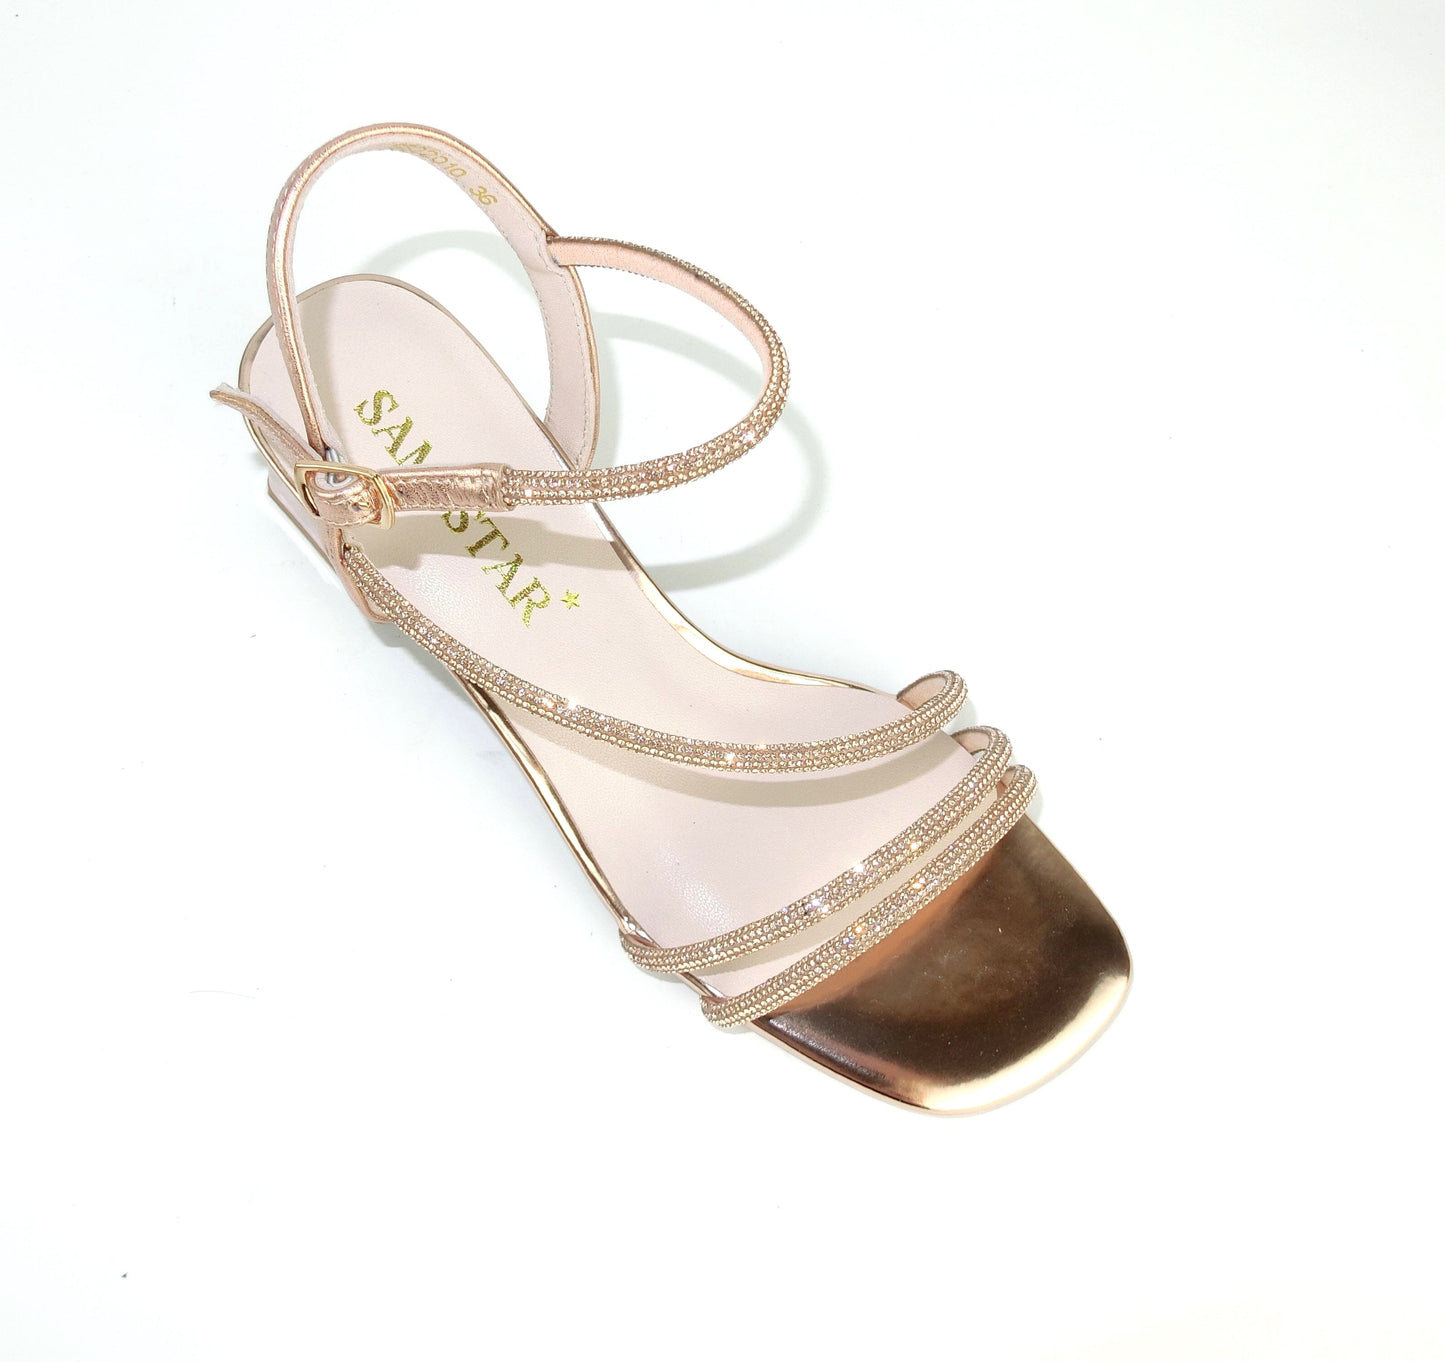 SS22010 Leather strappy rhinestone-embellished block heel sandals in Rosegold sandals Sam Star Shoes 